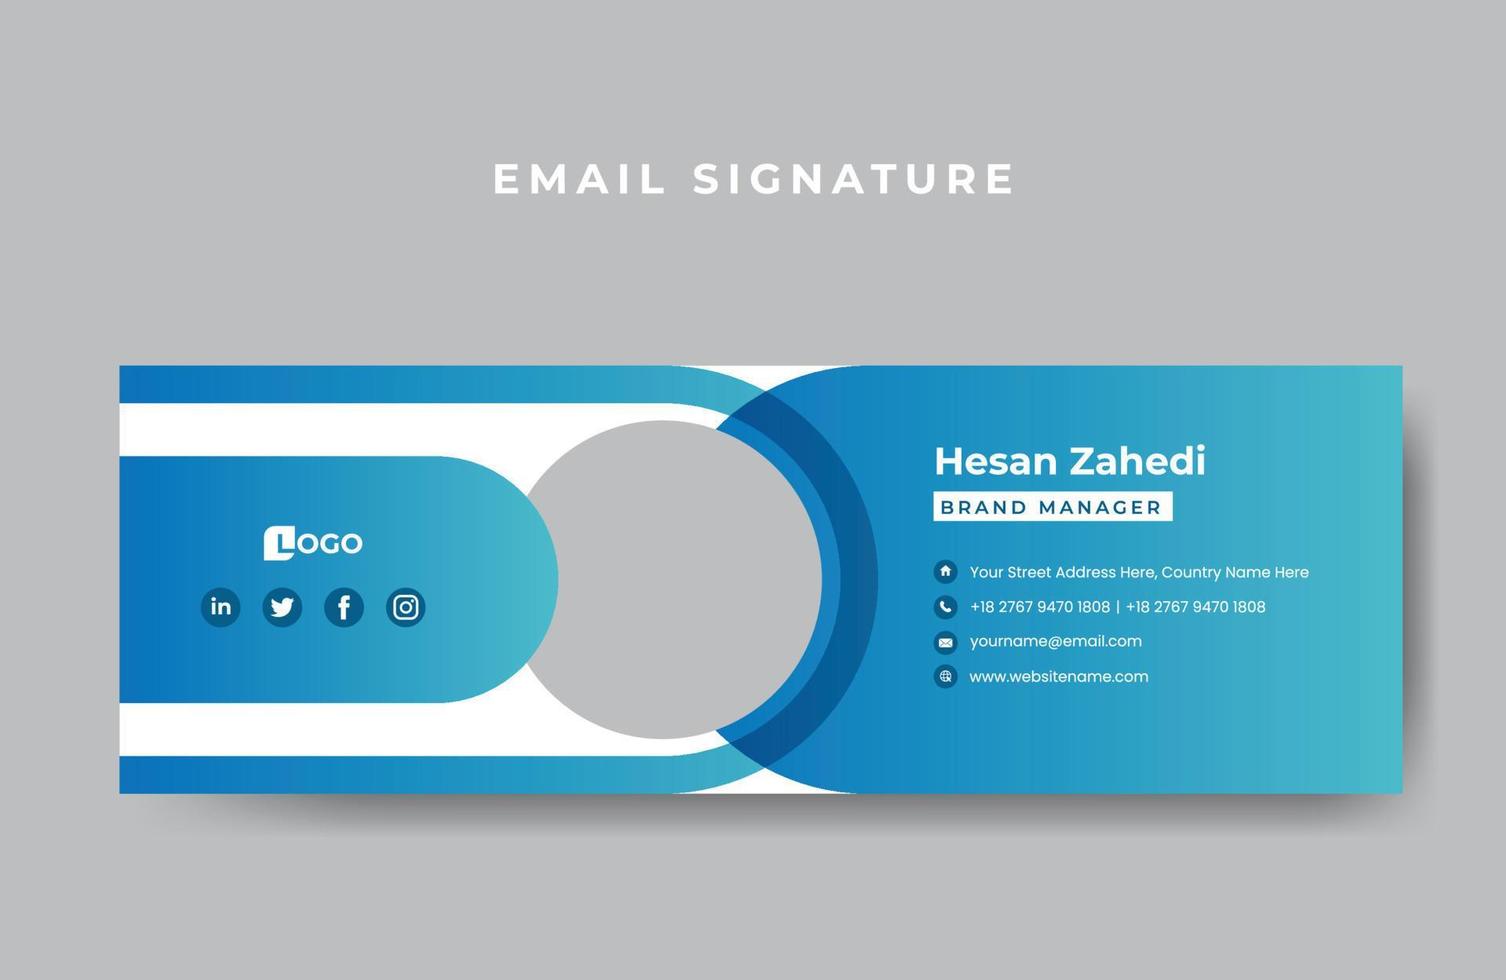 Email signature or email footer design template free Vector